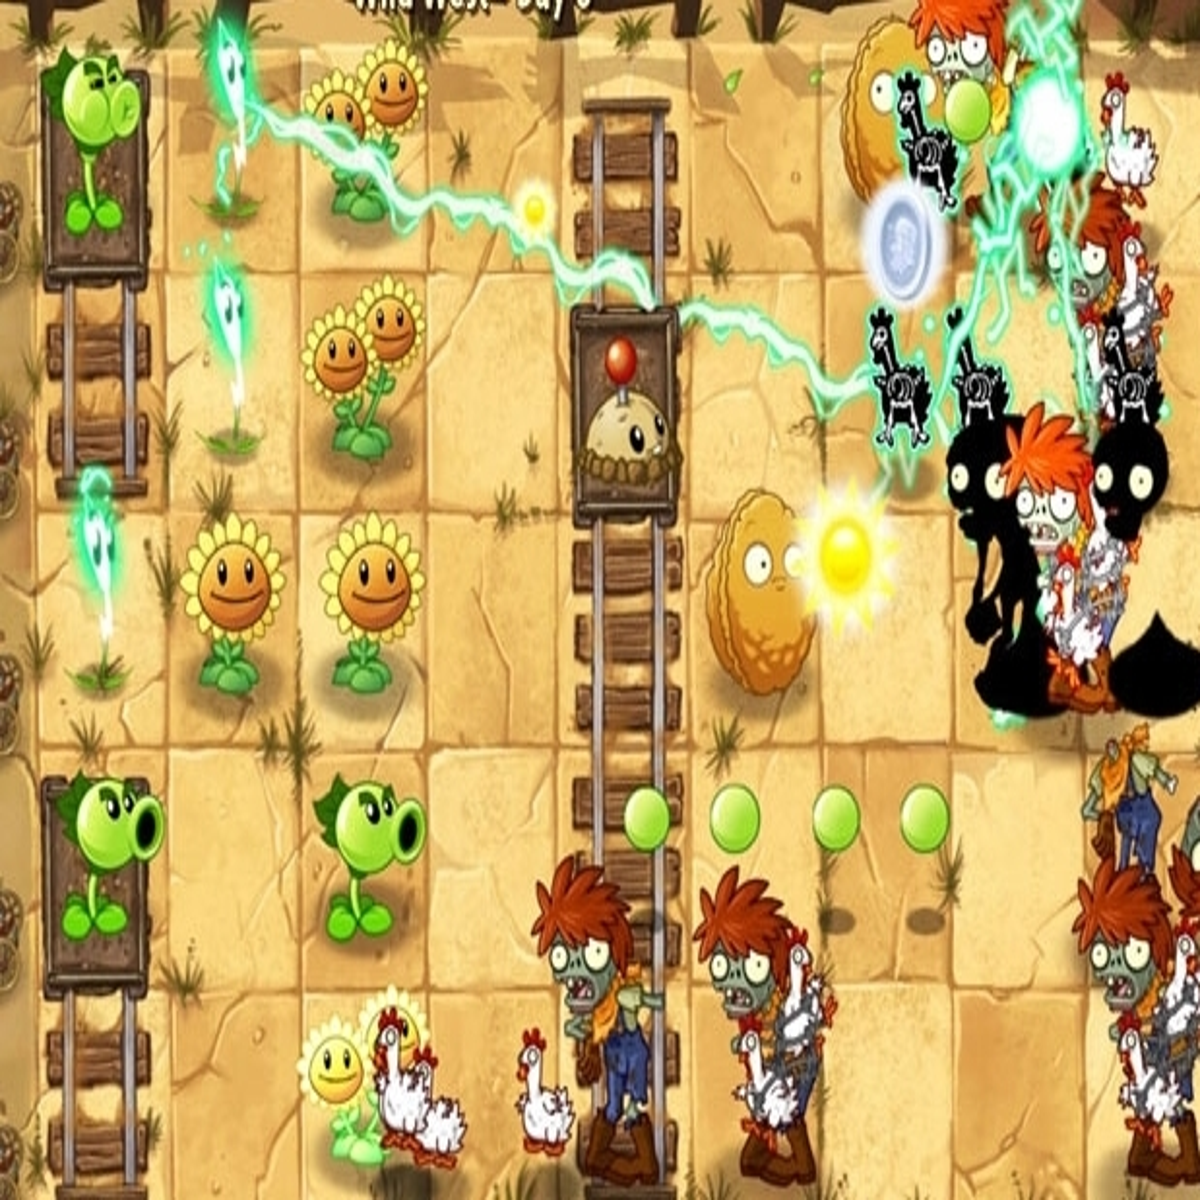 Plants vs Zombies 2' launches on iOS